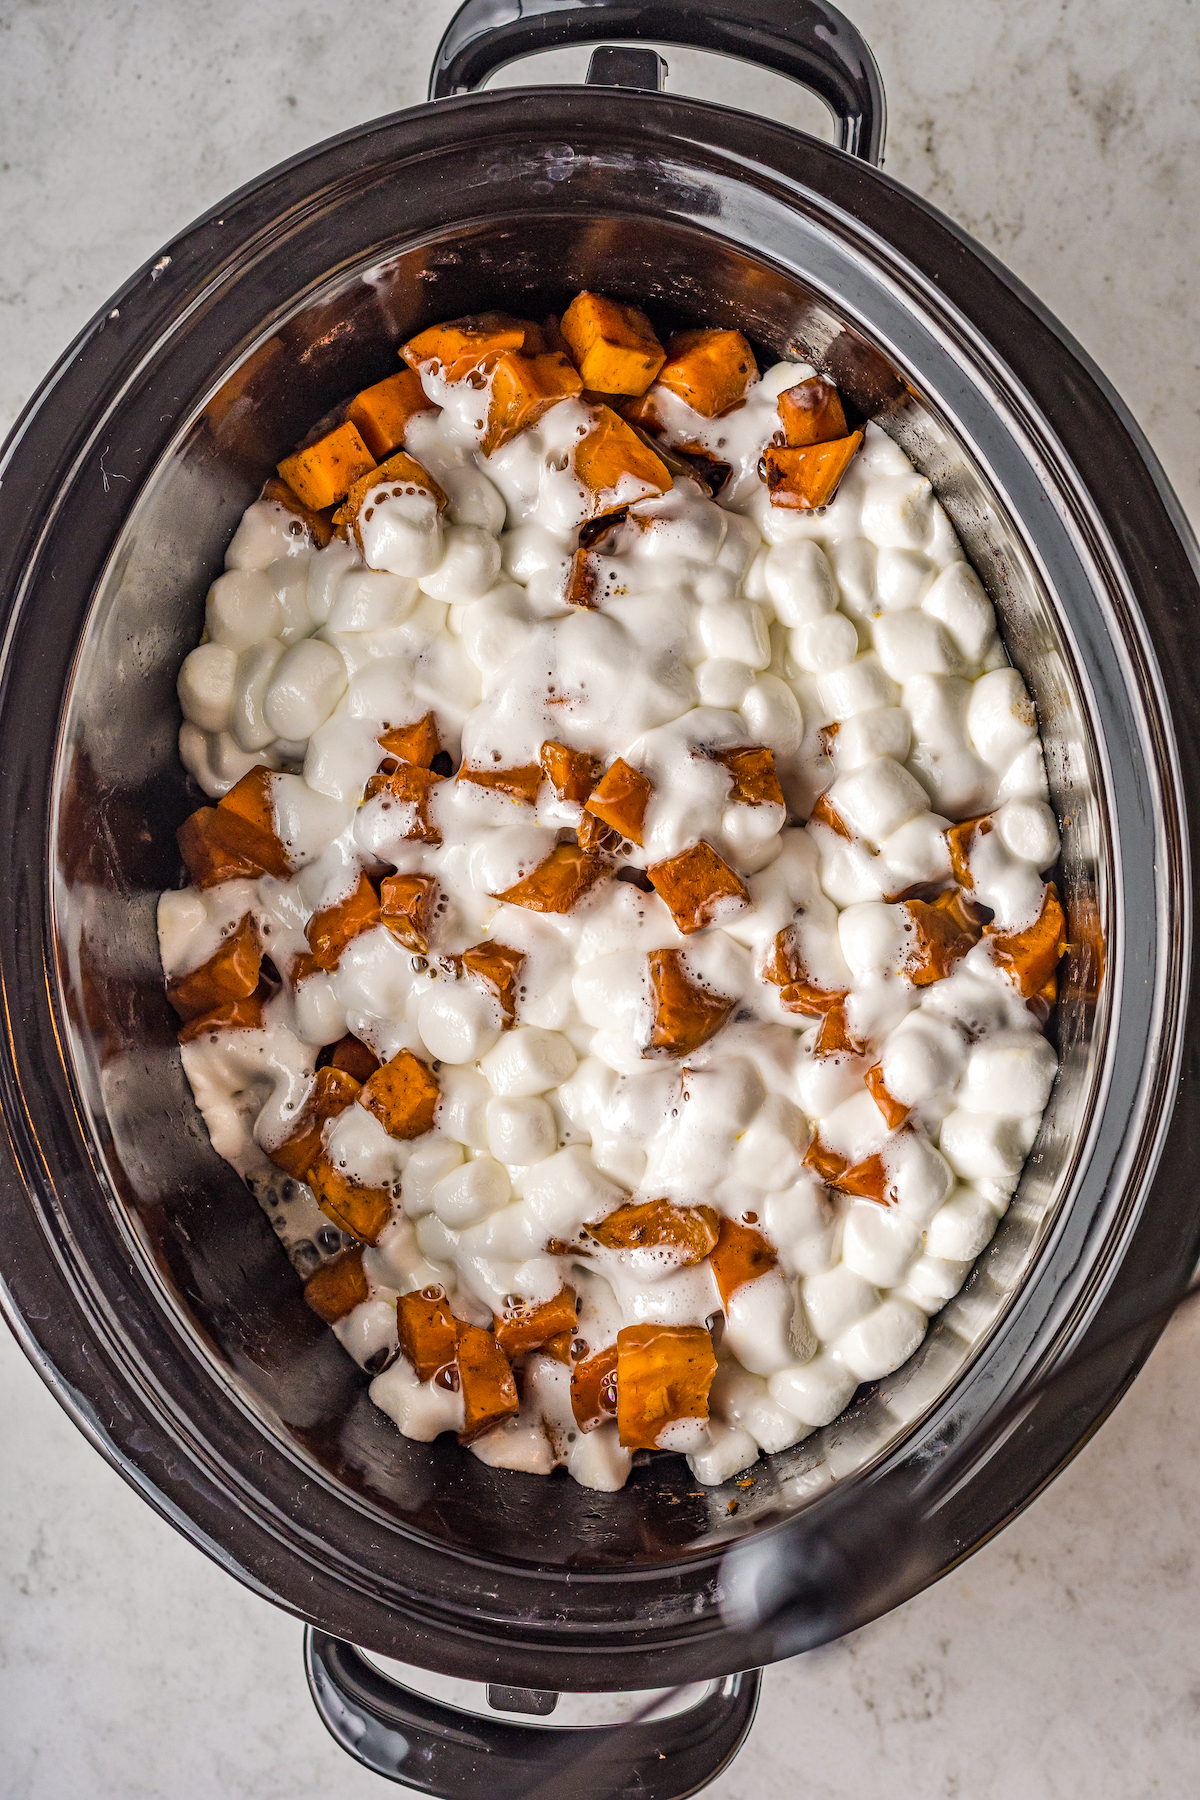 Sweet potatoes with marshmallows melted on top in a crockpot.